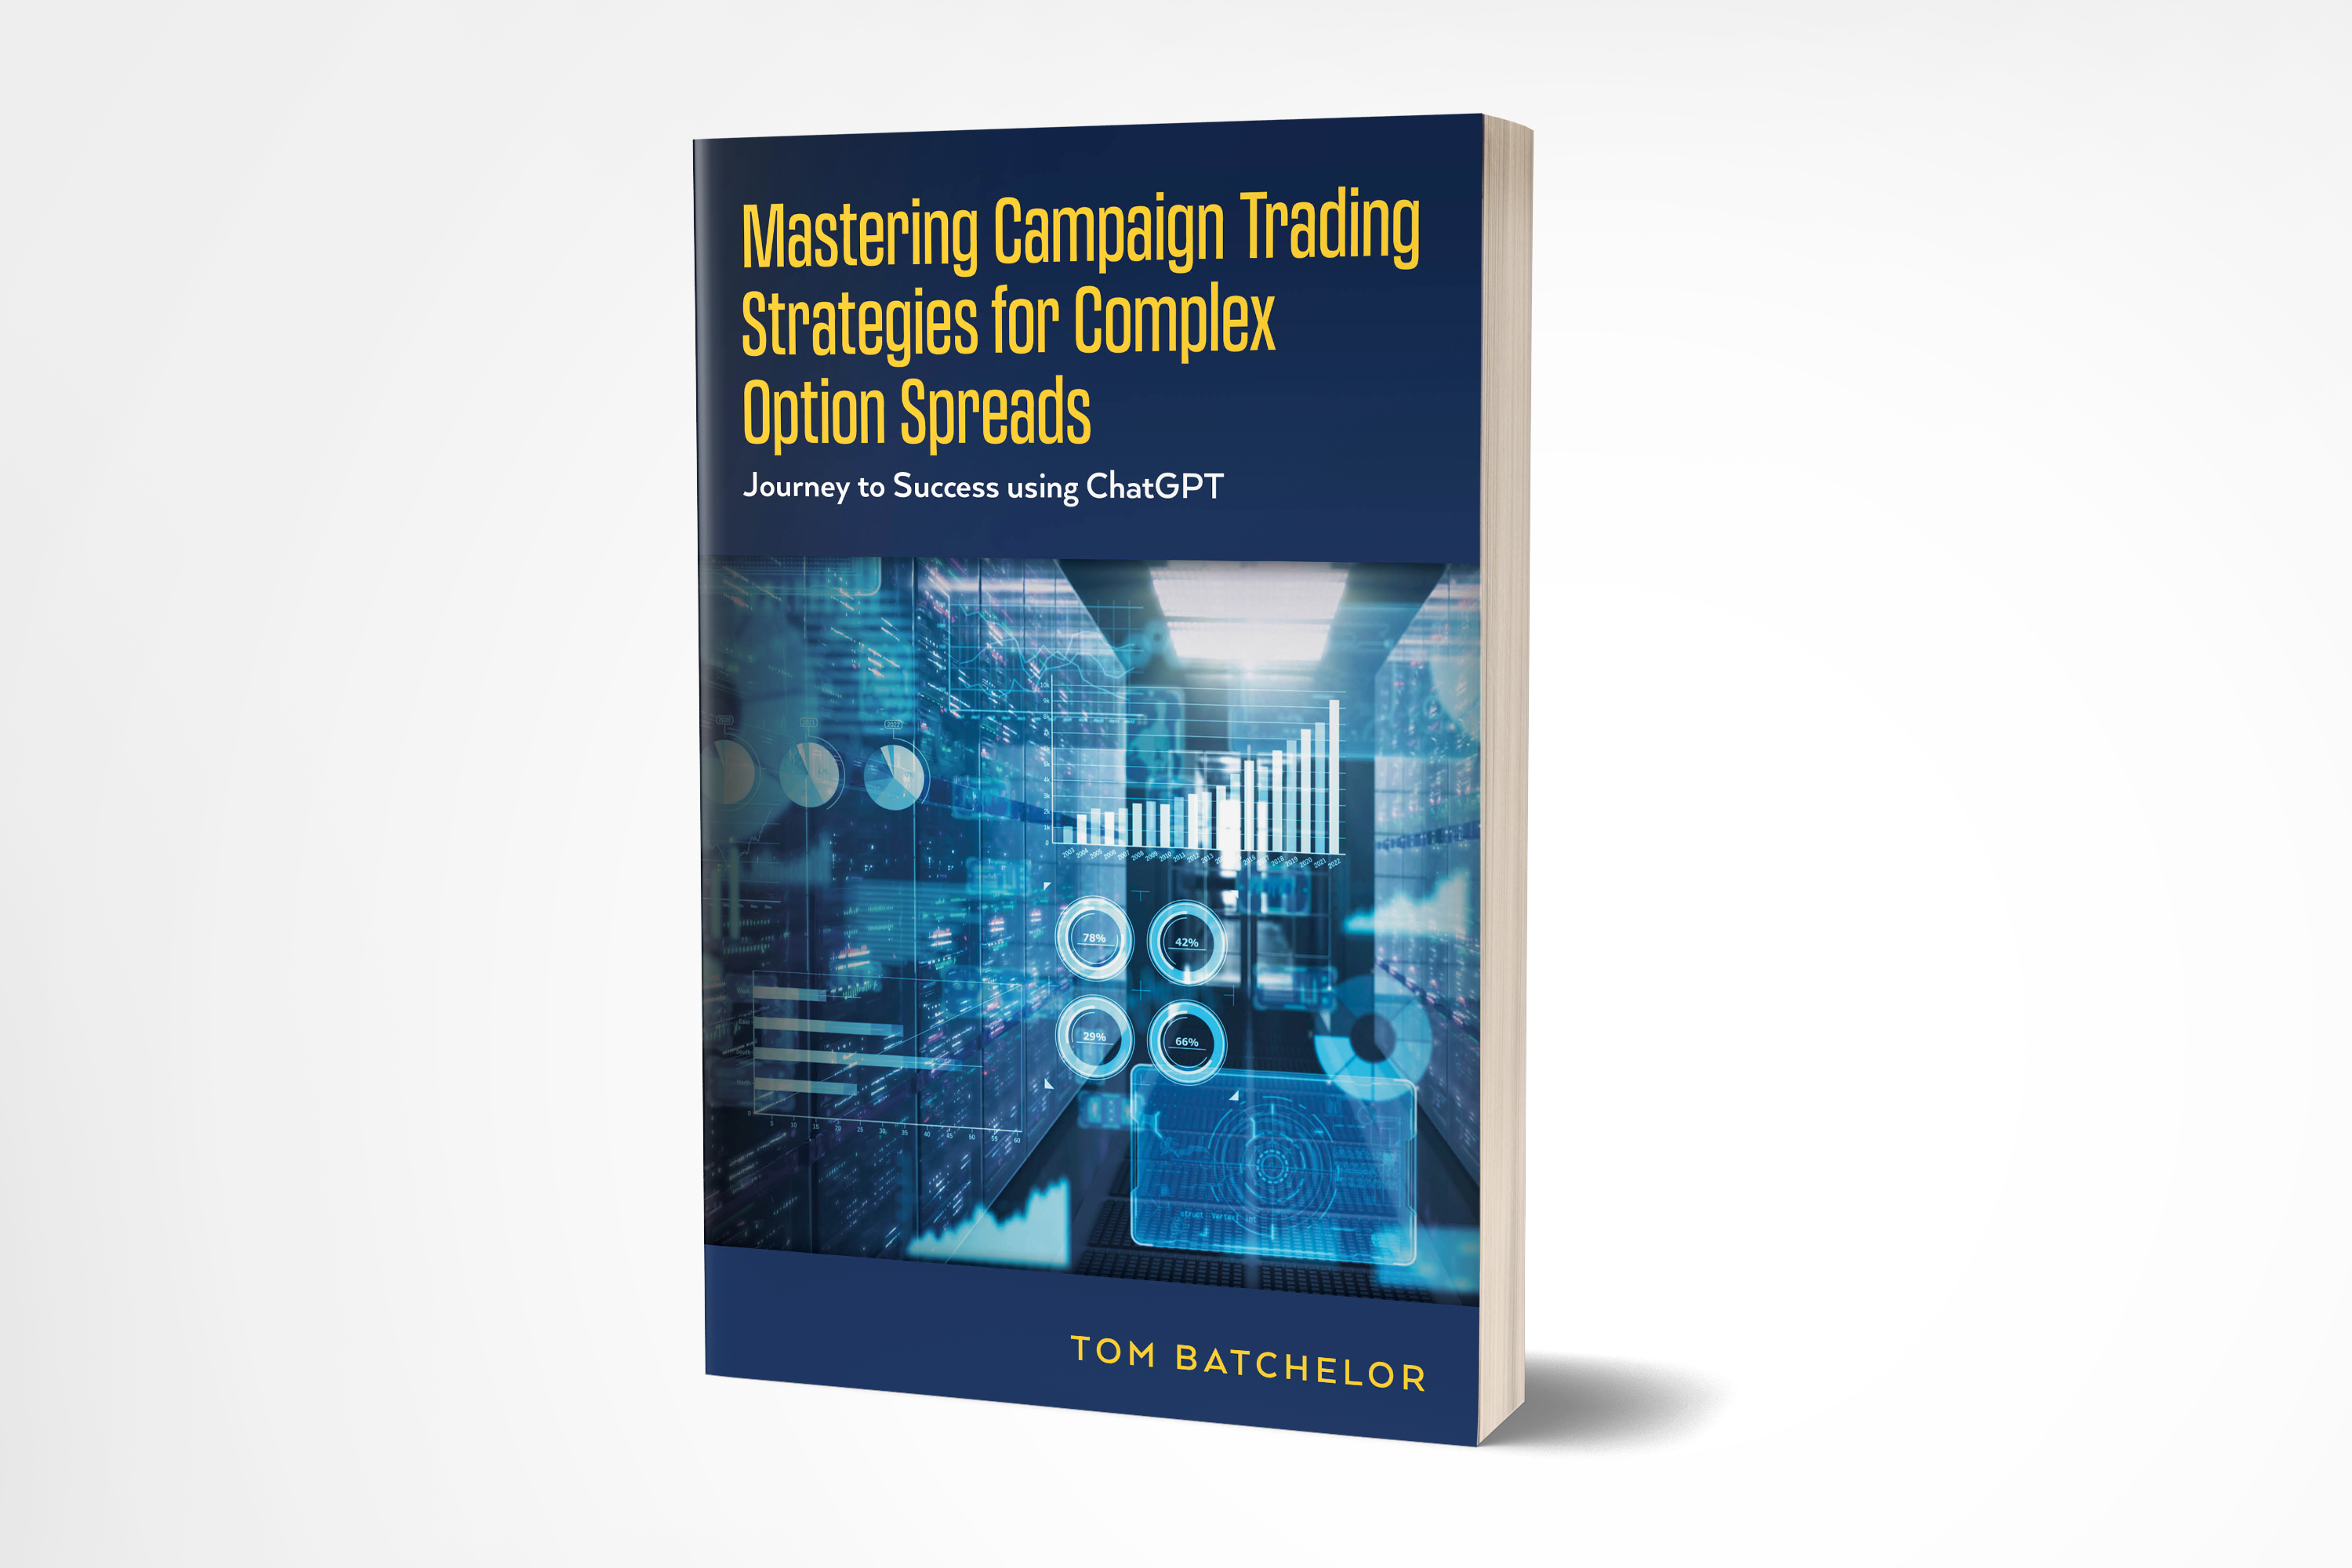 Mastering Campaign Trading Strategies for Complex Option Spreads: Journey to Success using ChatGPT